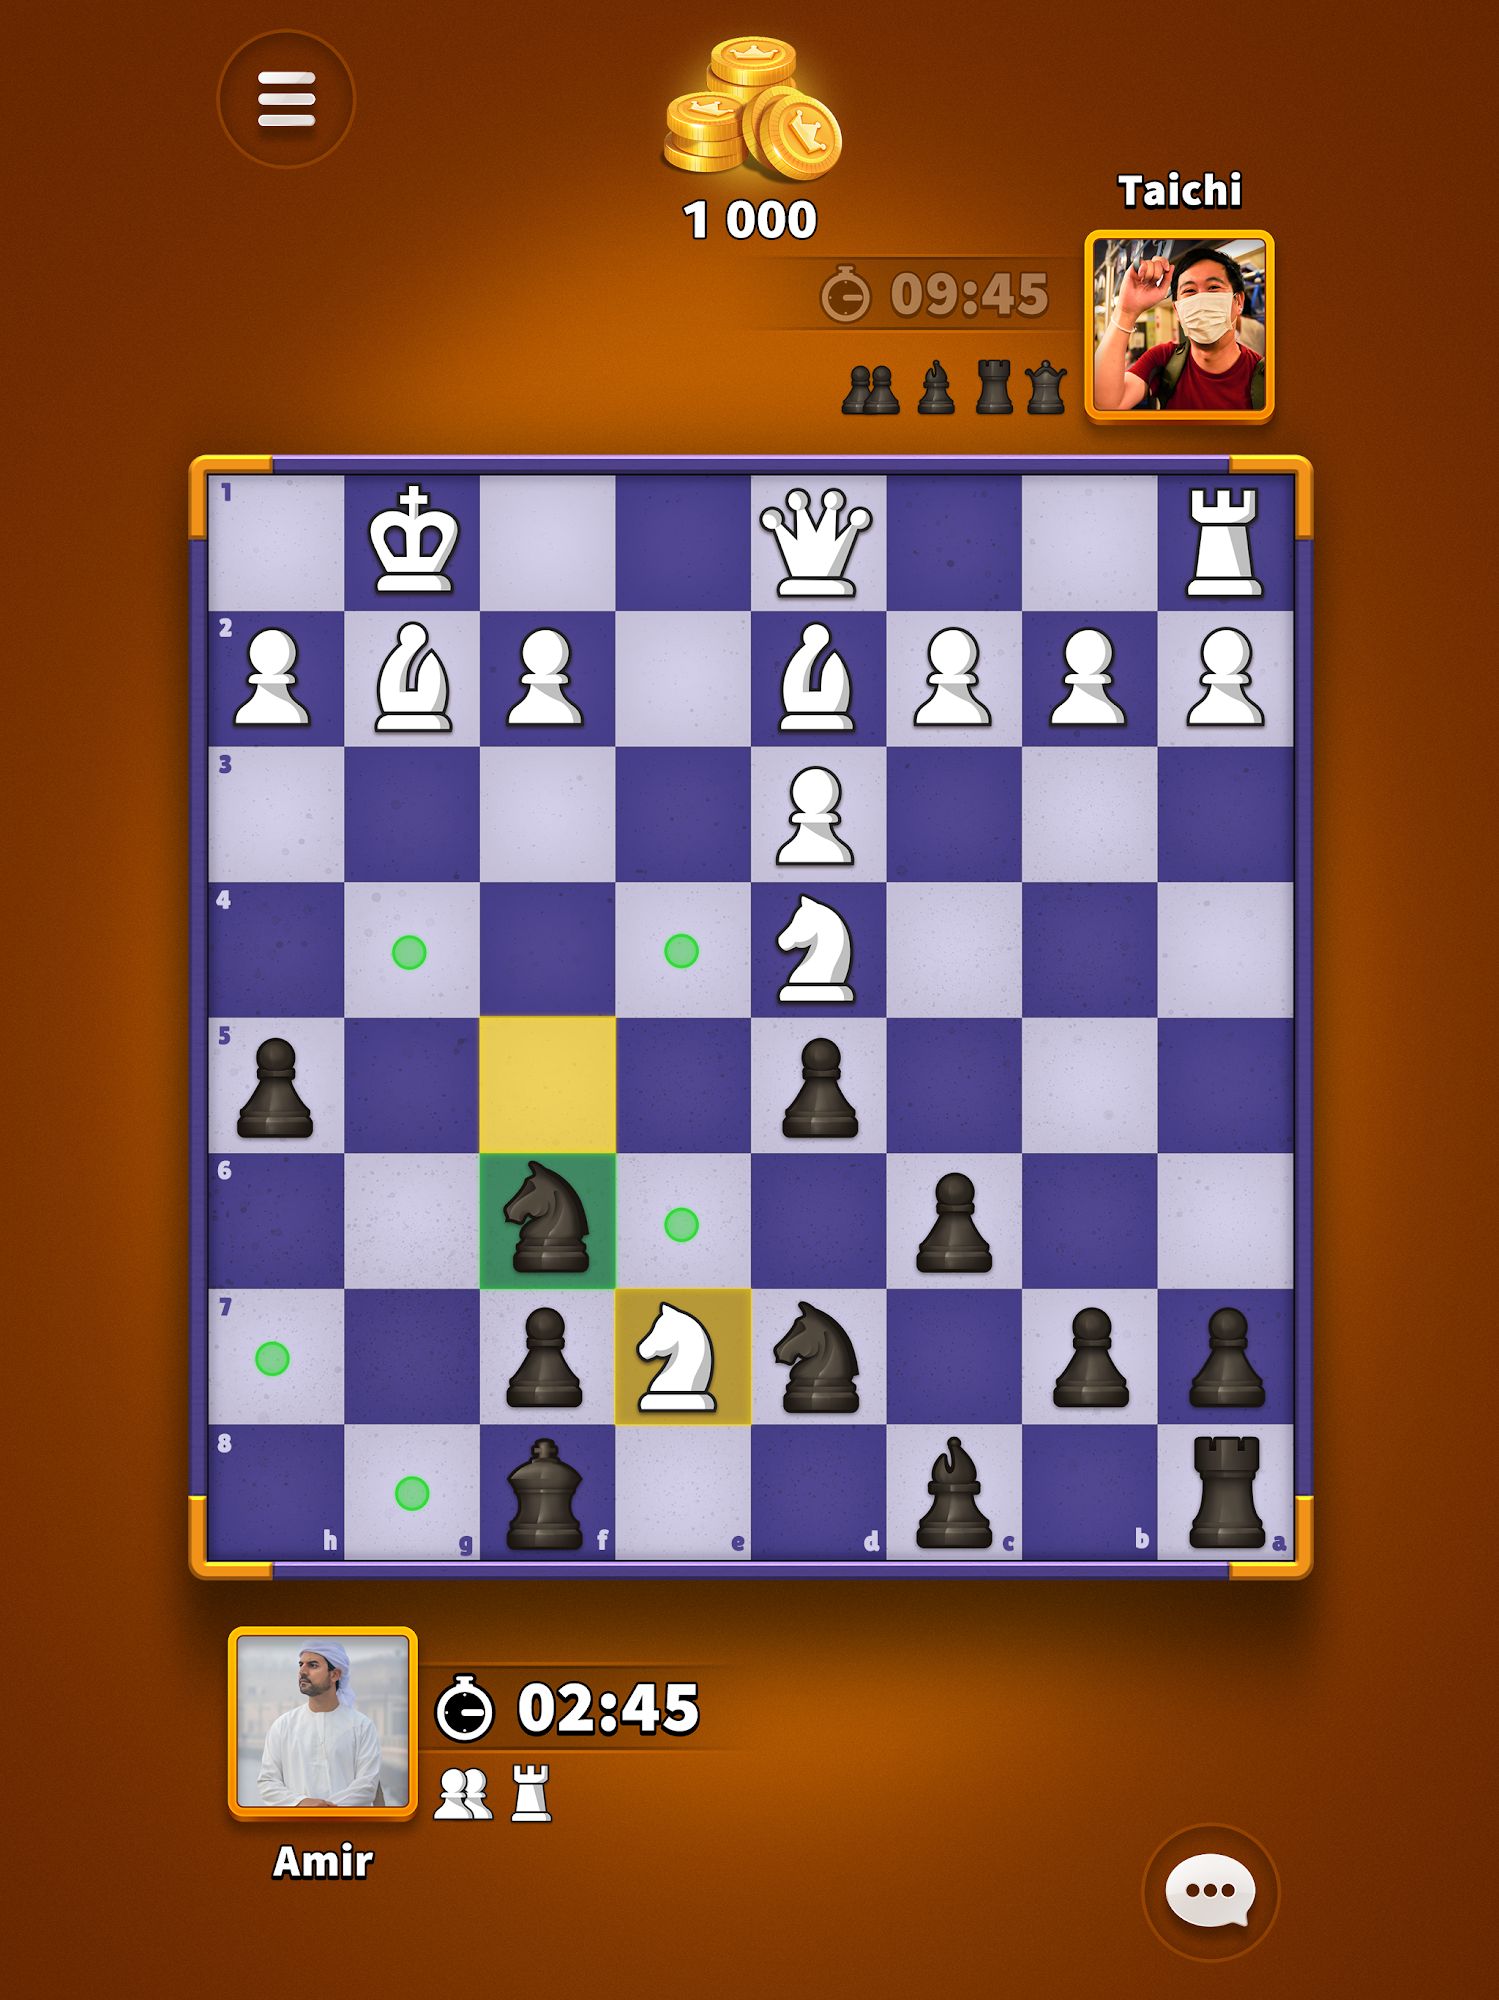 SparkChess APK for Android Free Download